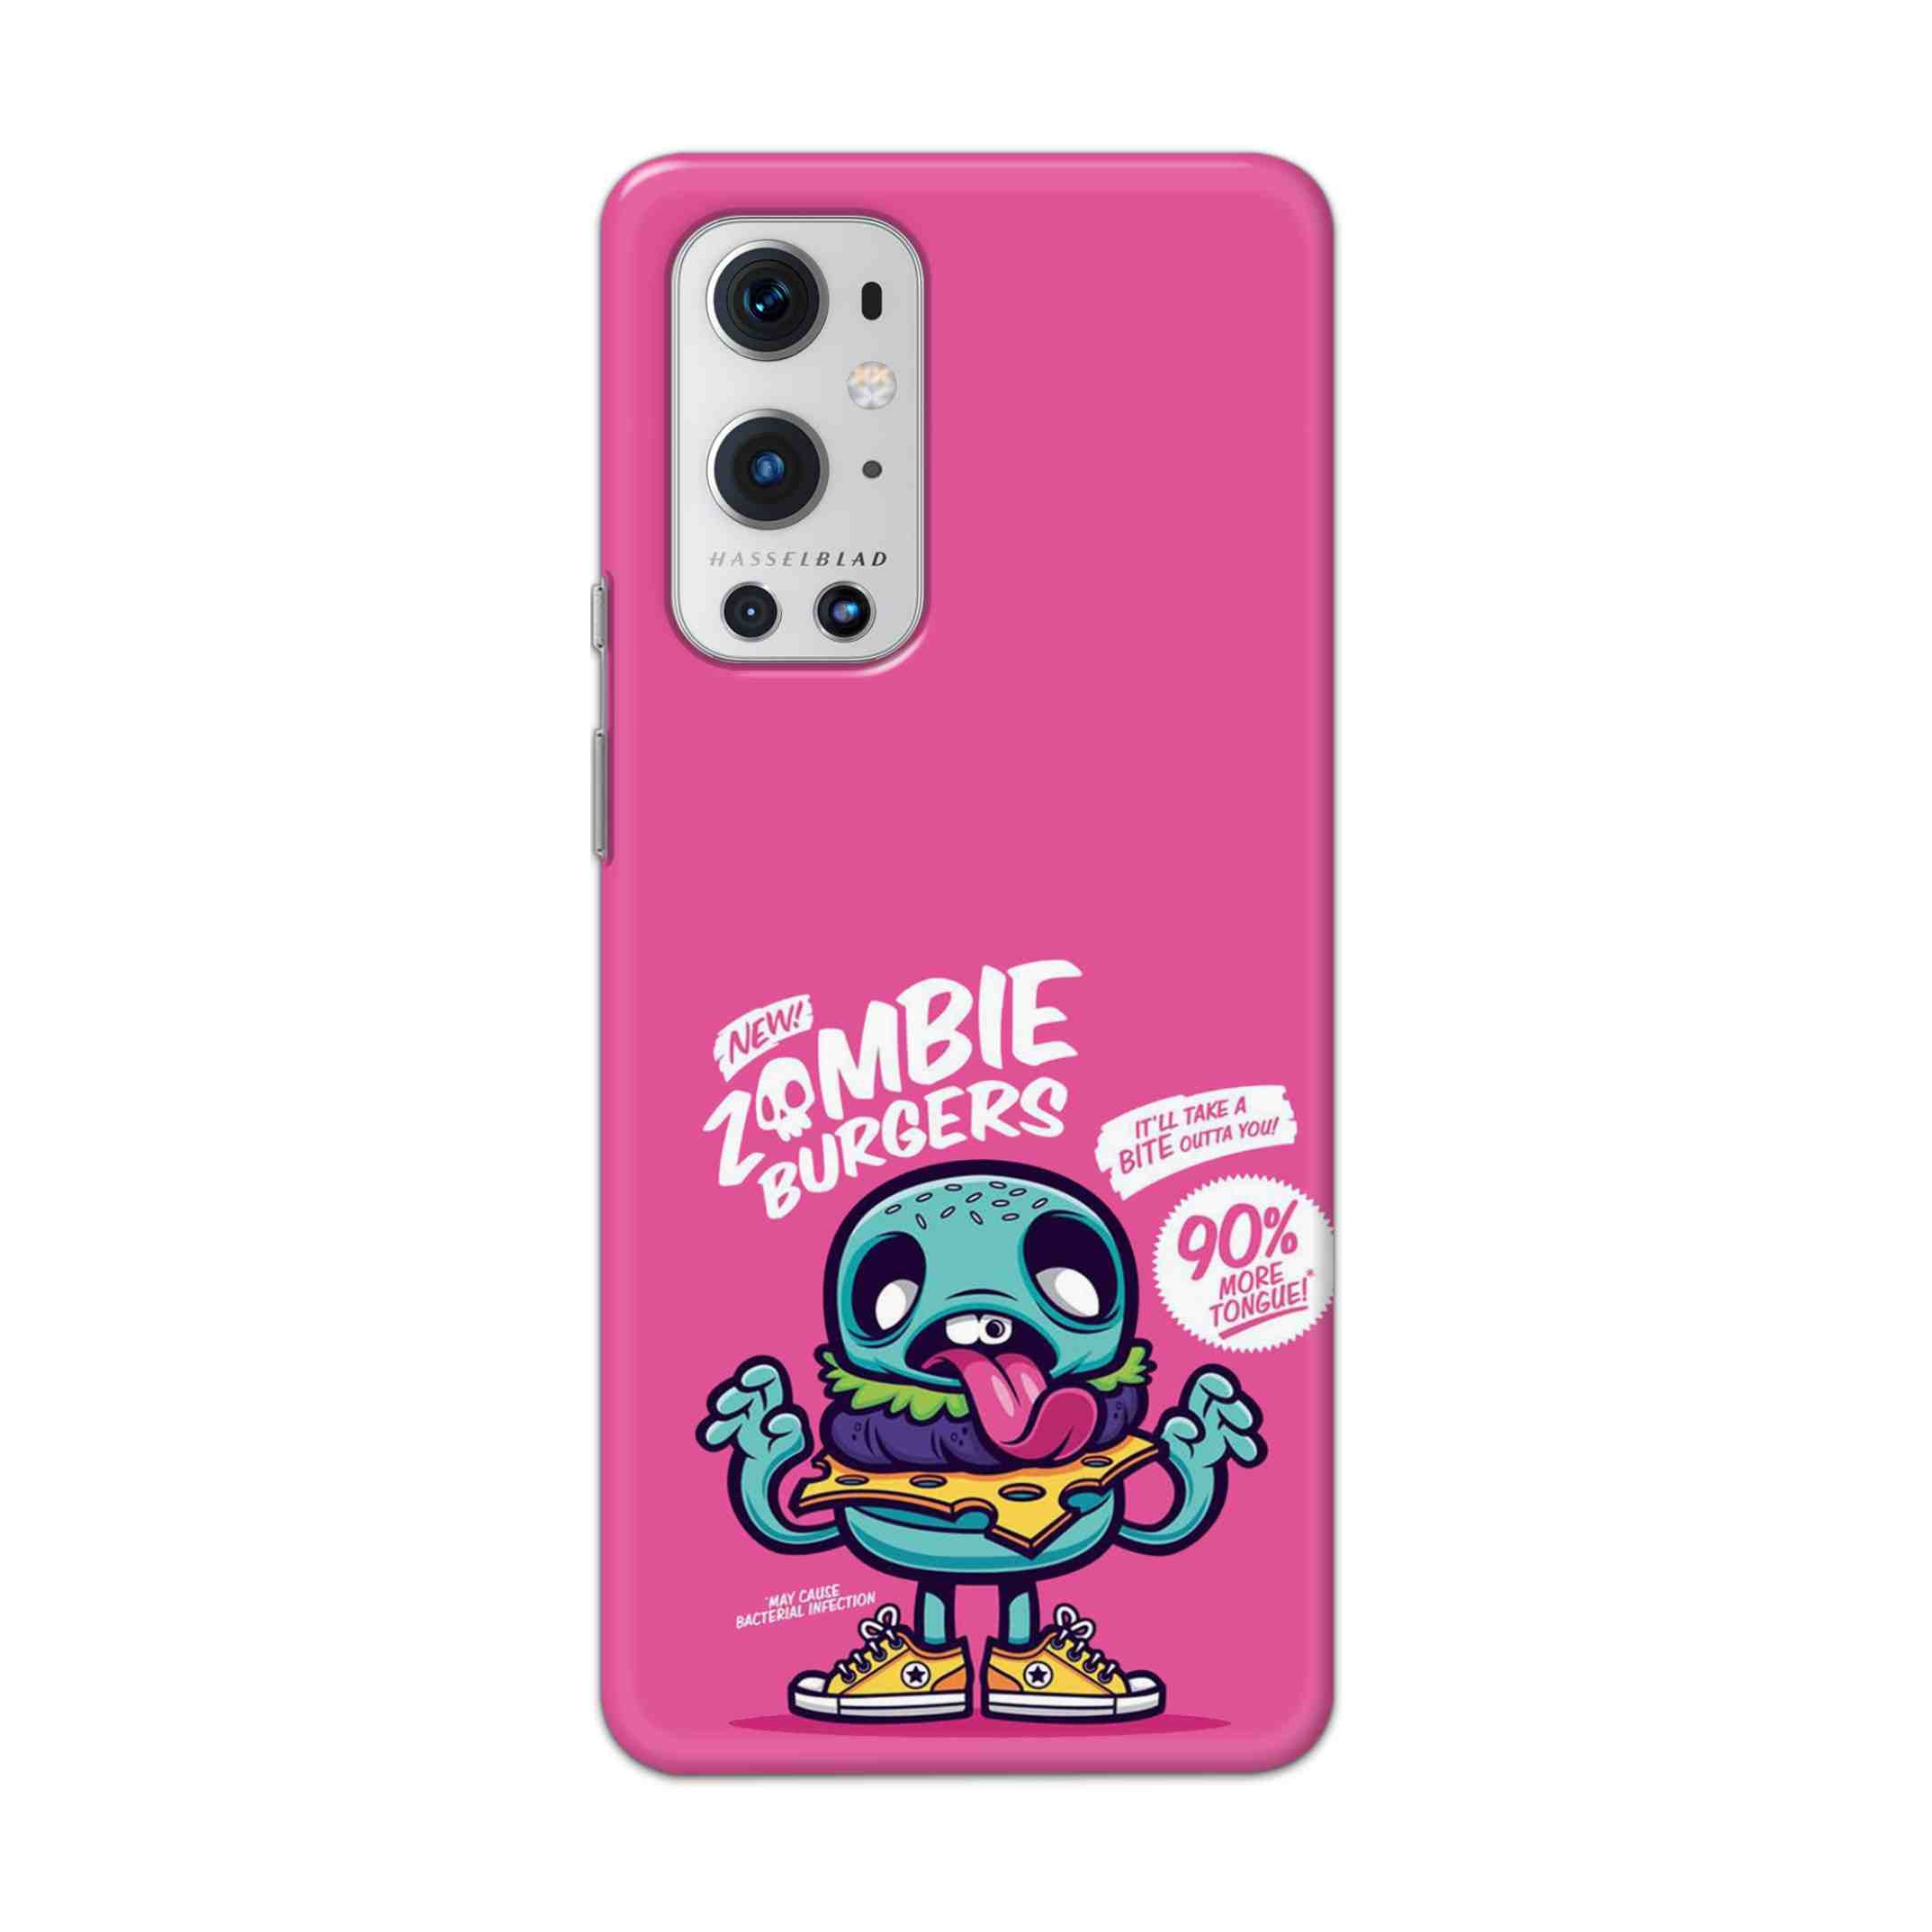 Buy New Zombie Burgers Hard Back Mobile Phone Case Cover For OnePlus 9 Pro Online